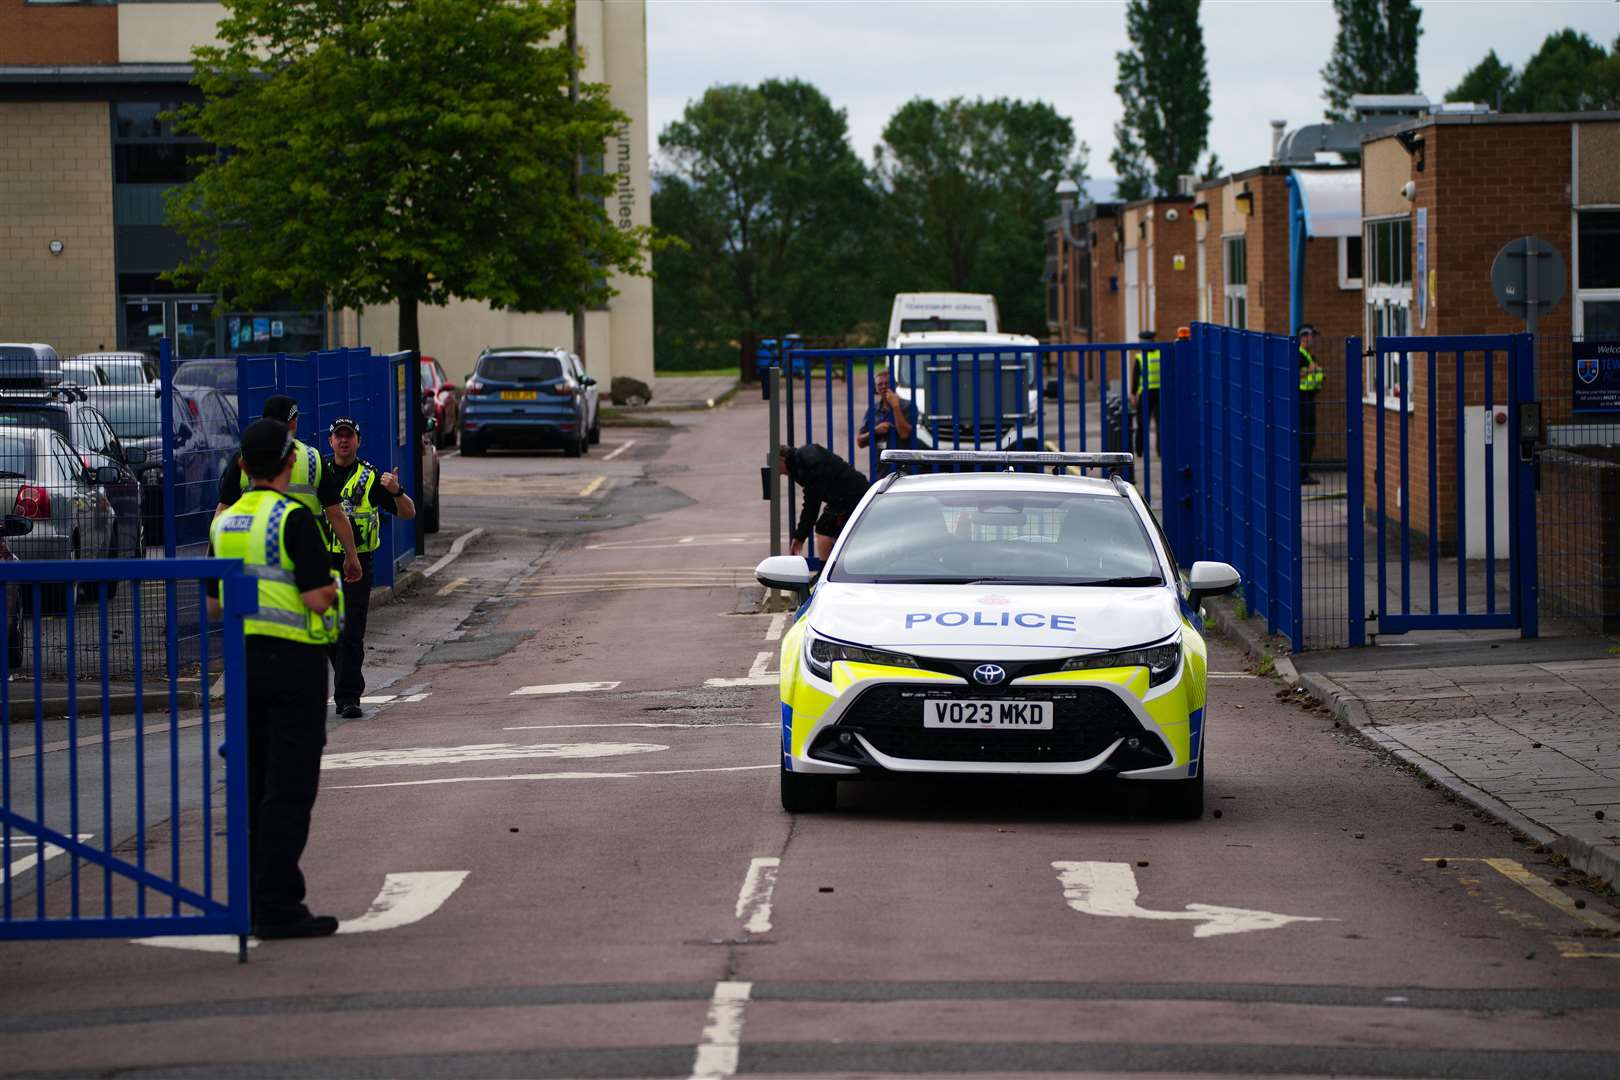 Police said the suspect, a teenage boy from Tewkesbury, was arrested on suspicion of attempted murder and remained in police custody (Ben Birchall/PA)